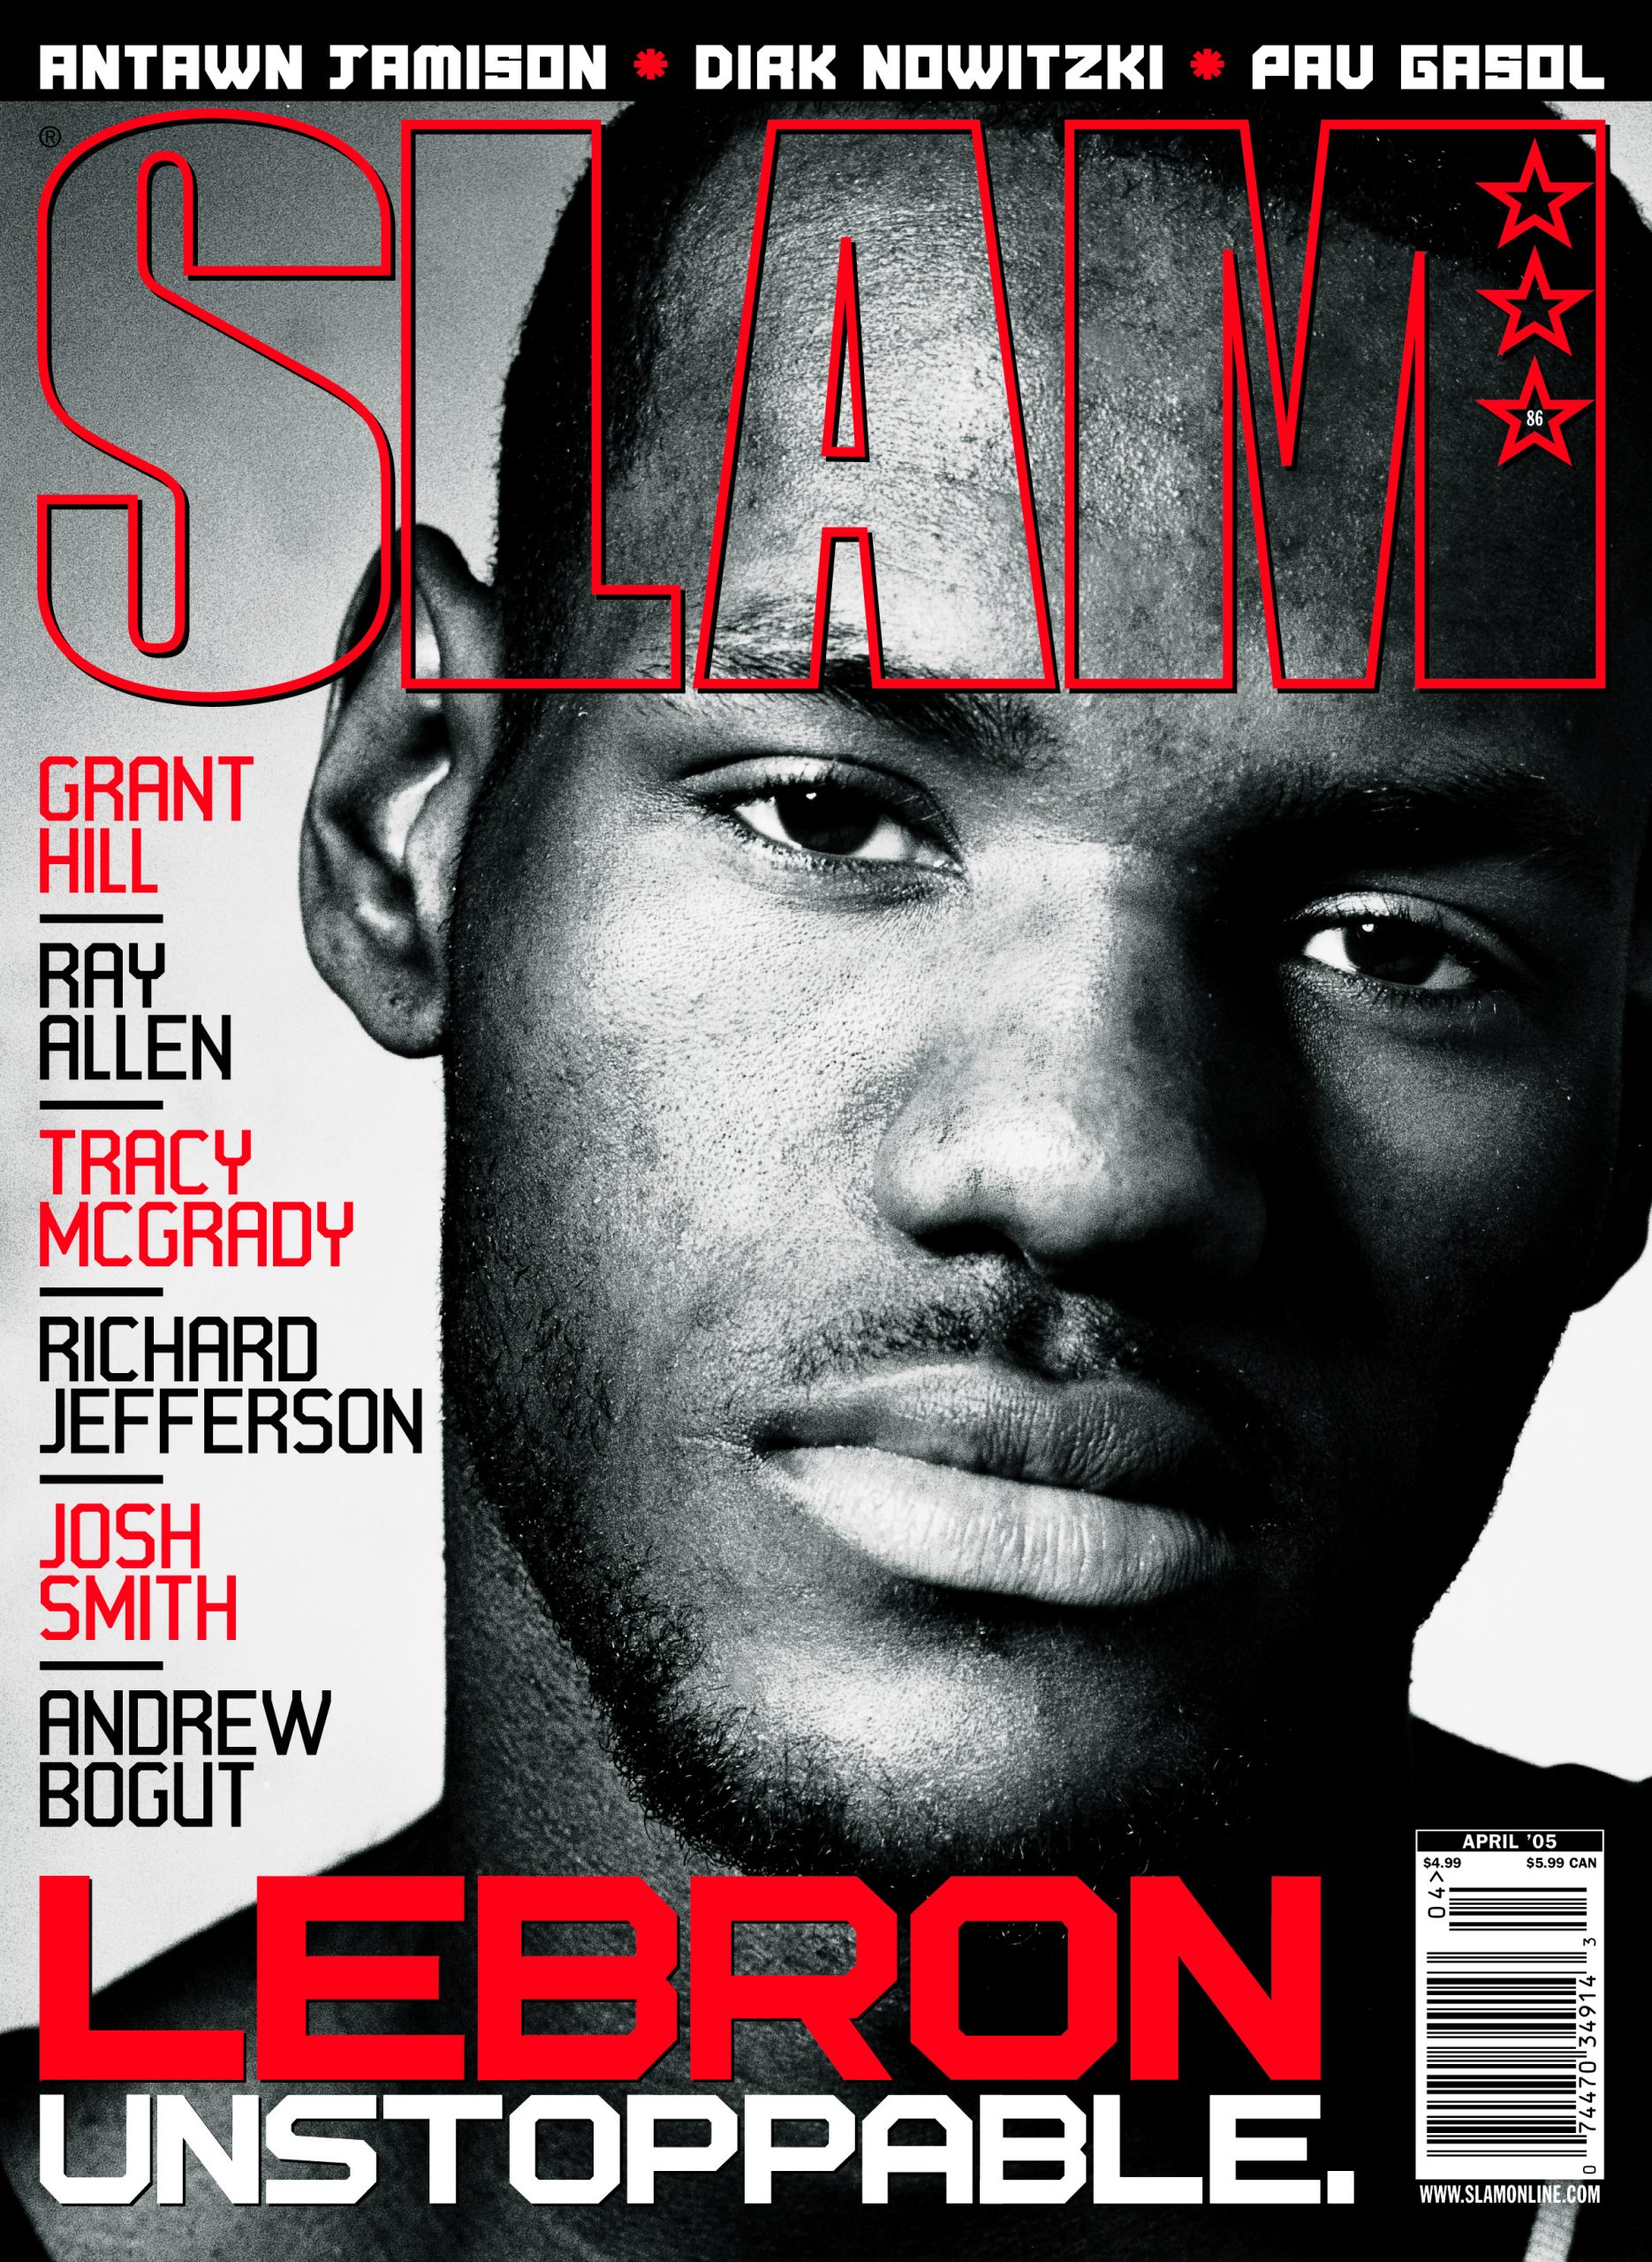 THE 30 PLAYERS WHO DEFINED SLAM’S 30 YEARS: LeBron James